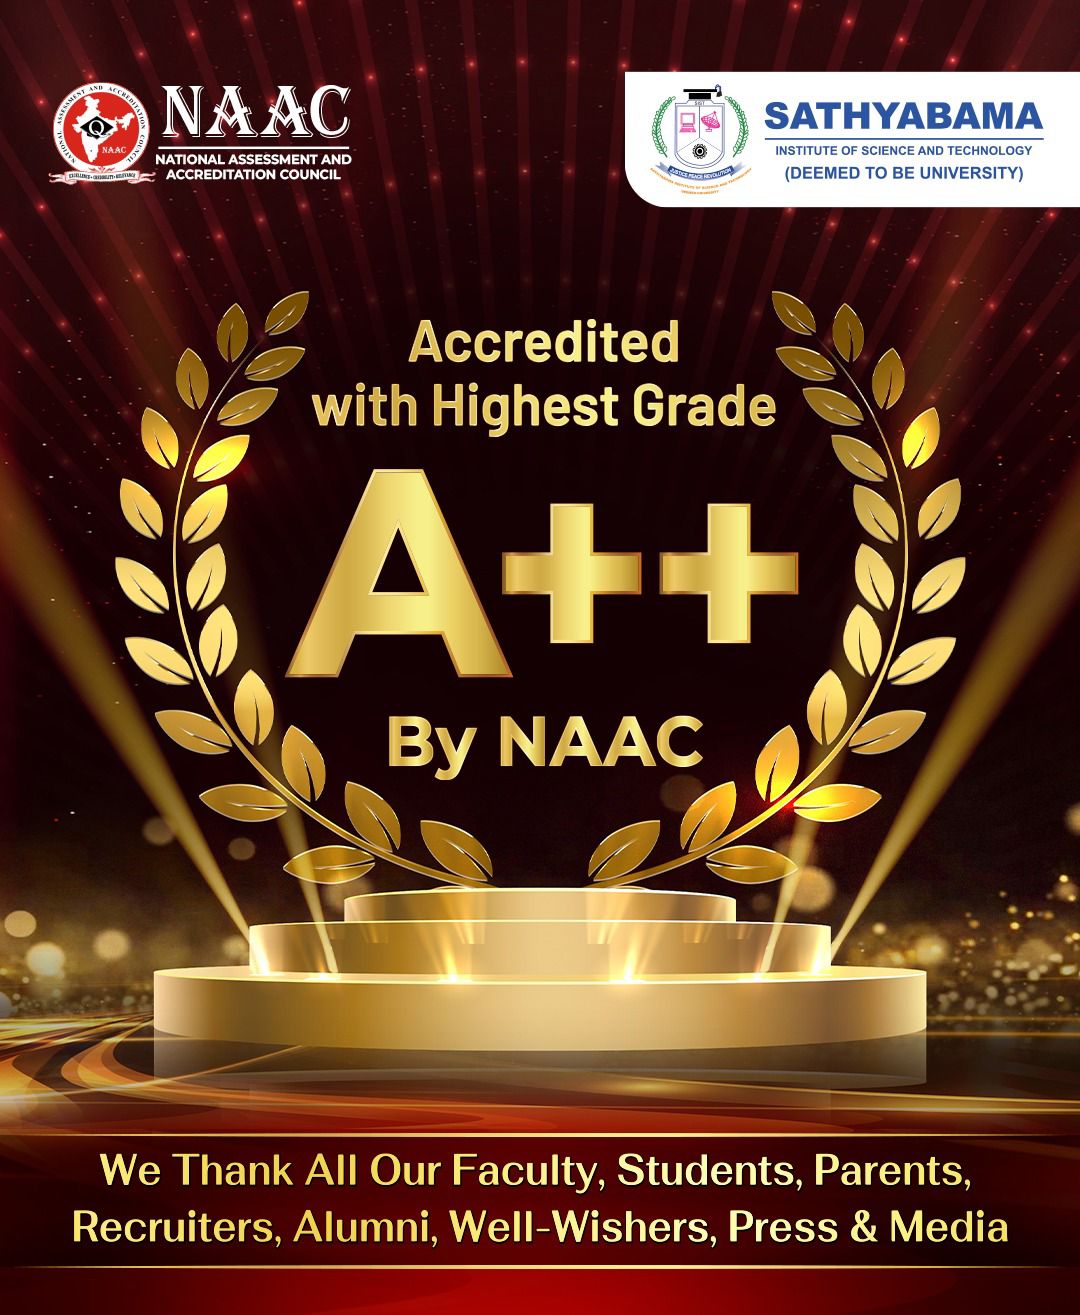 SATHYABAMA is accredited with Highest Grade  A++  by NAAC